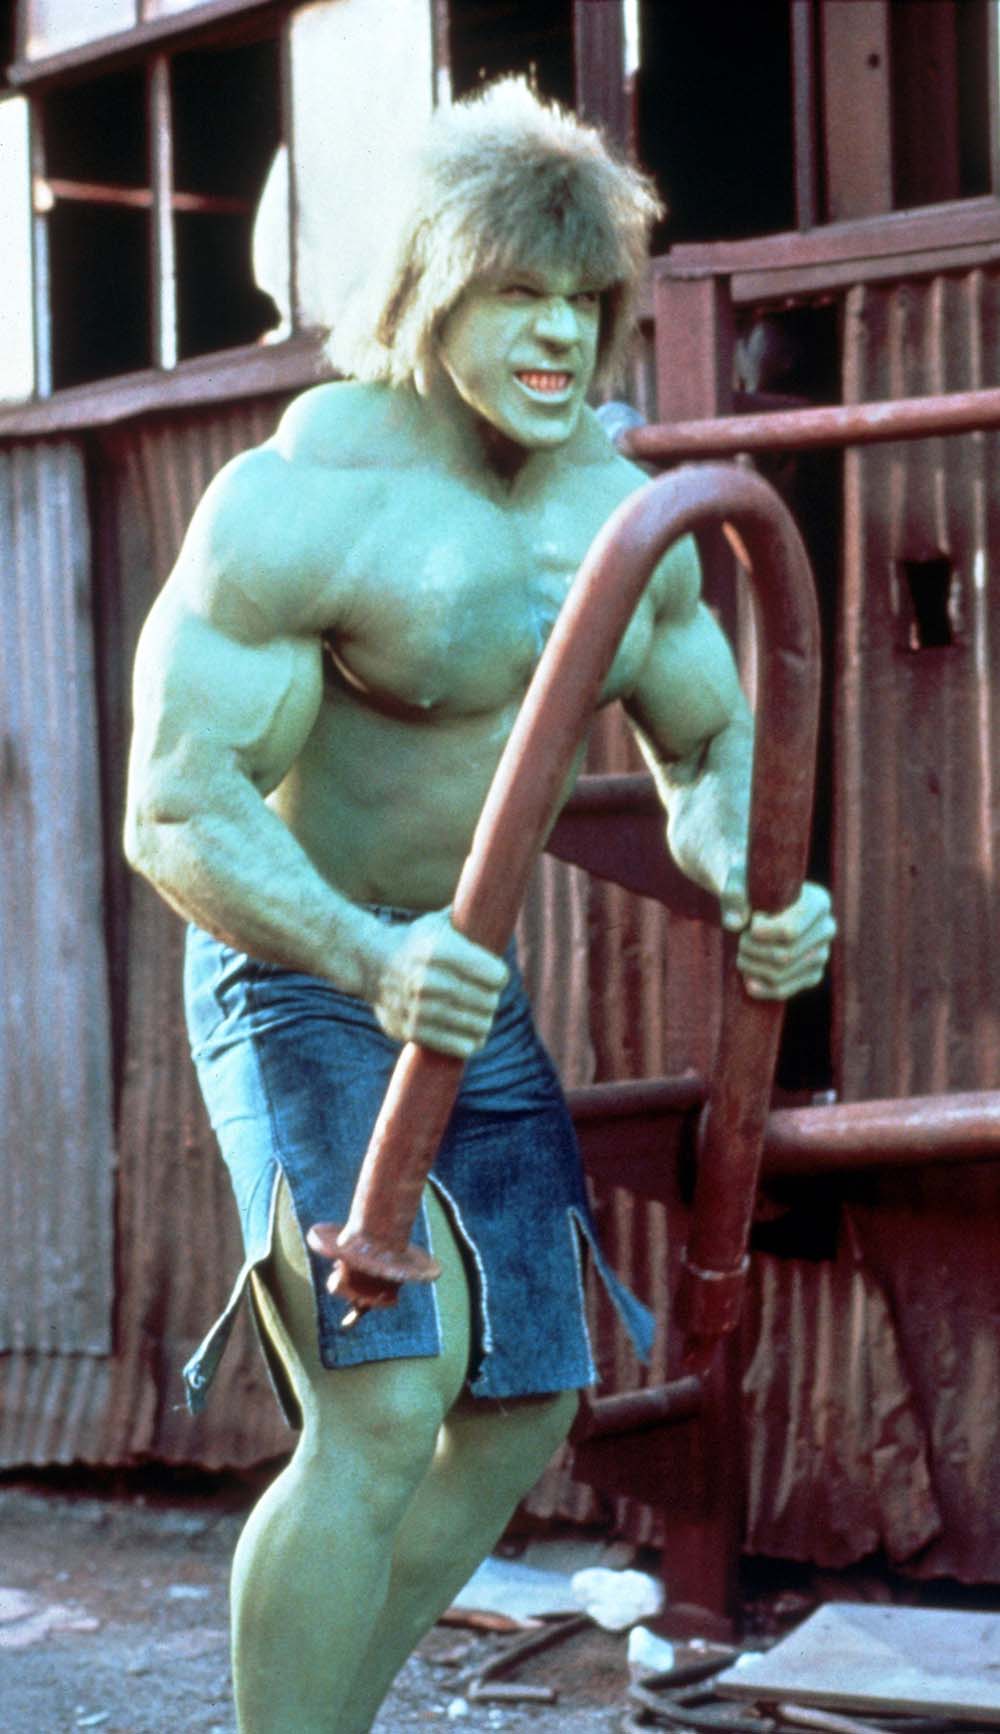 Lou Ferrigno as the Hulked-out version of Dr Bruce Banner in the classic ‘Incredible Hulk’ TV series